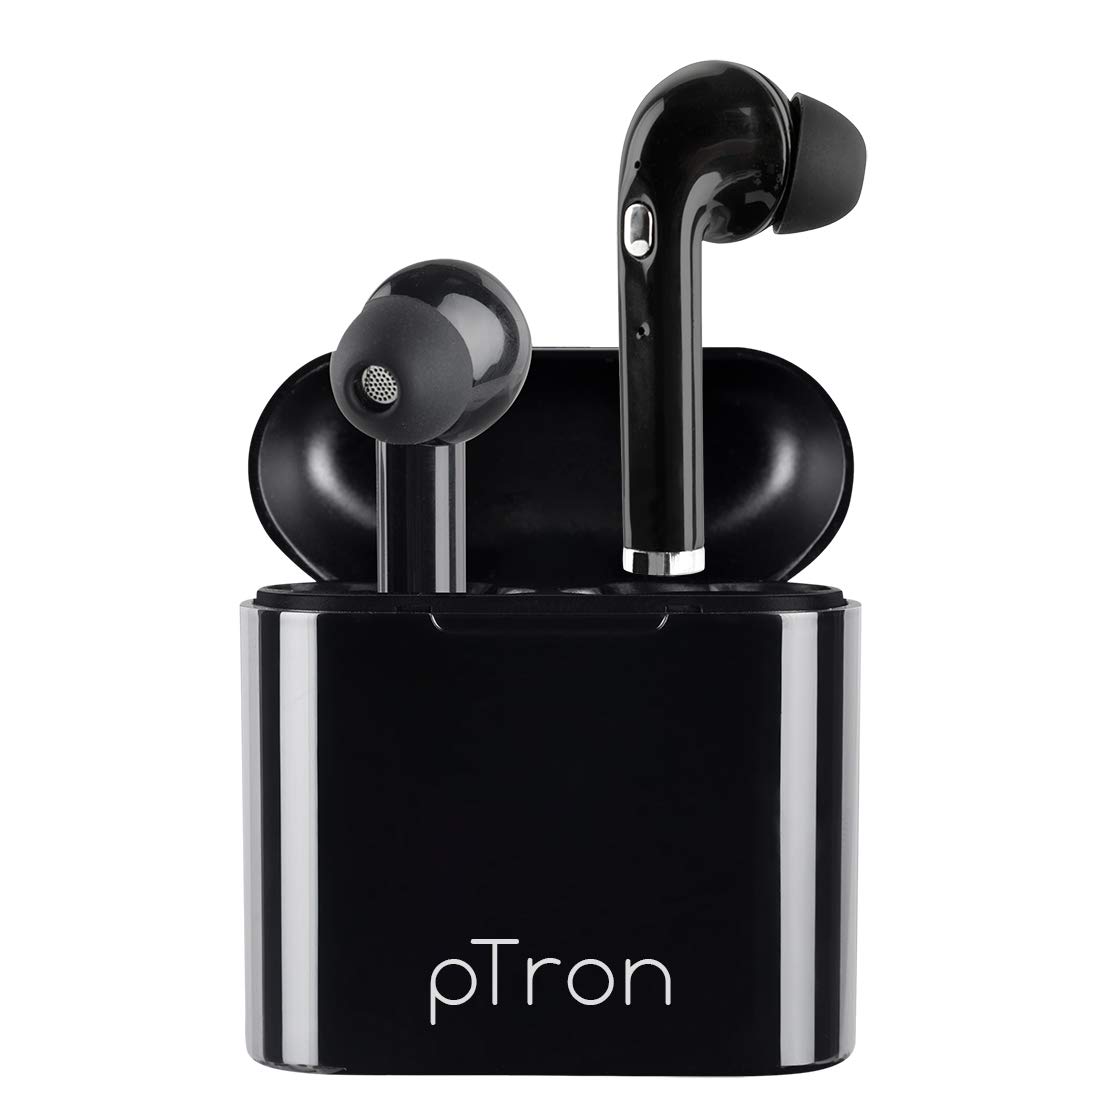 pTron Bassbuds Lite launched at Rs 899